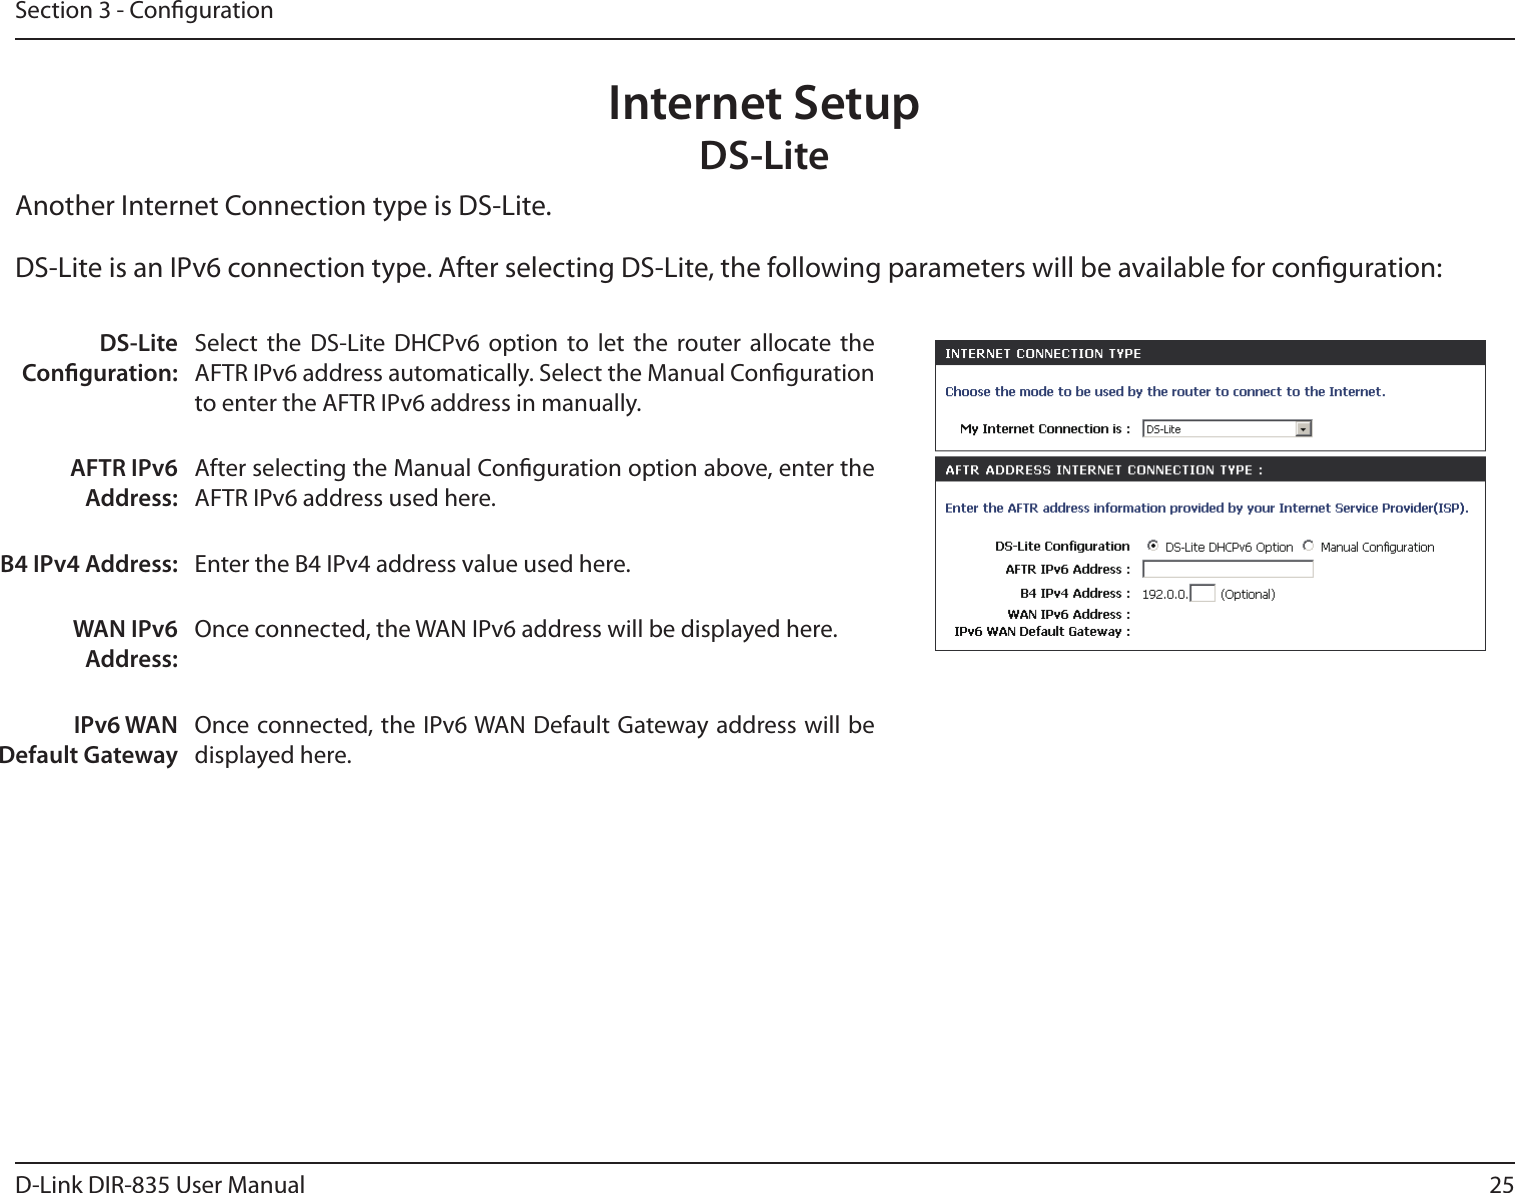 25D-Link DIR-835 User ManualSection 3 - CongurationInternet SetupDS-LiteAnother Internet Connection type is DS-Lite.DS-Lite Conguration:Select  the  DS-Lite  DHCPv6  option  to  let  the  router  allocate  the AFTR IPv6 address automatically. Select the Manual Conguration to enter the AFTR IPv6 address in manually.AFTR IPv6 Address:After selecting the Manual Conguration option above, enter the AFTR IPv6 address used here.B4 IPv4 Address: Enter the B4 IPv4 address value used here.WAN IPv6 Address:Once connected, the WAN IPv6 address will be displayed here.IPv6 WAN Default GatewayOnce connected, the IPv6 WAN Default Gateway address will be displayed here.DS-Lite is an IPv6 connection type. After selecting DS-Lite, the following parameters will be available for conguration: